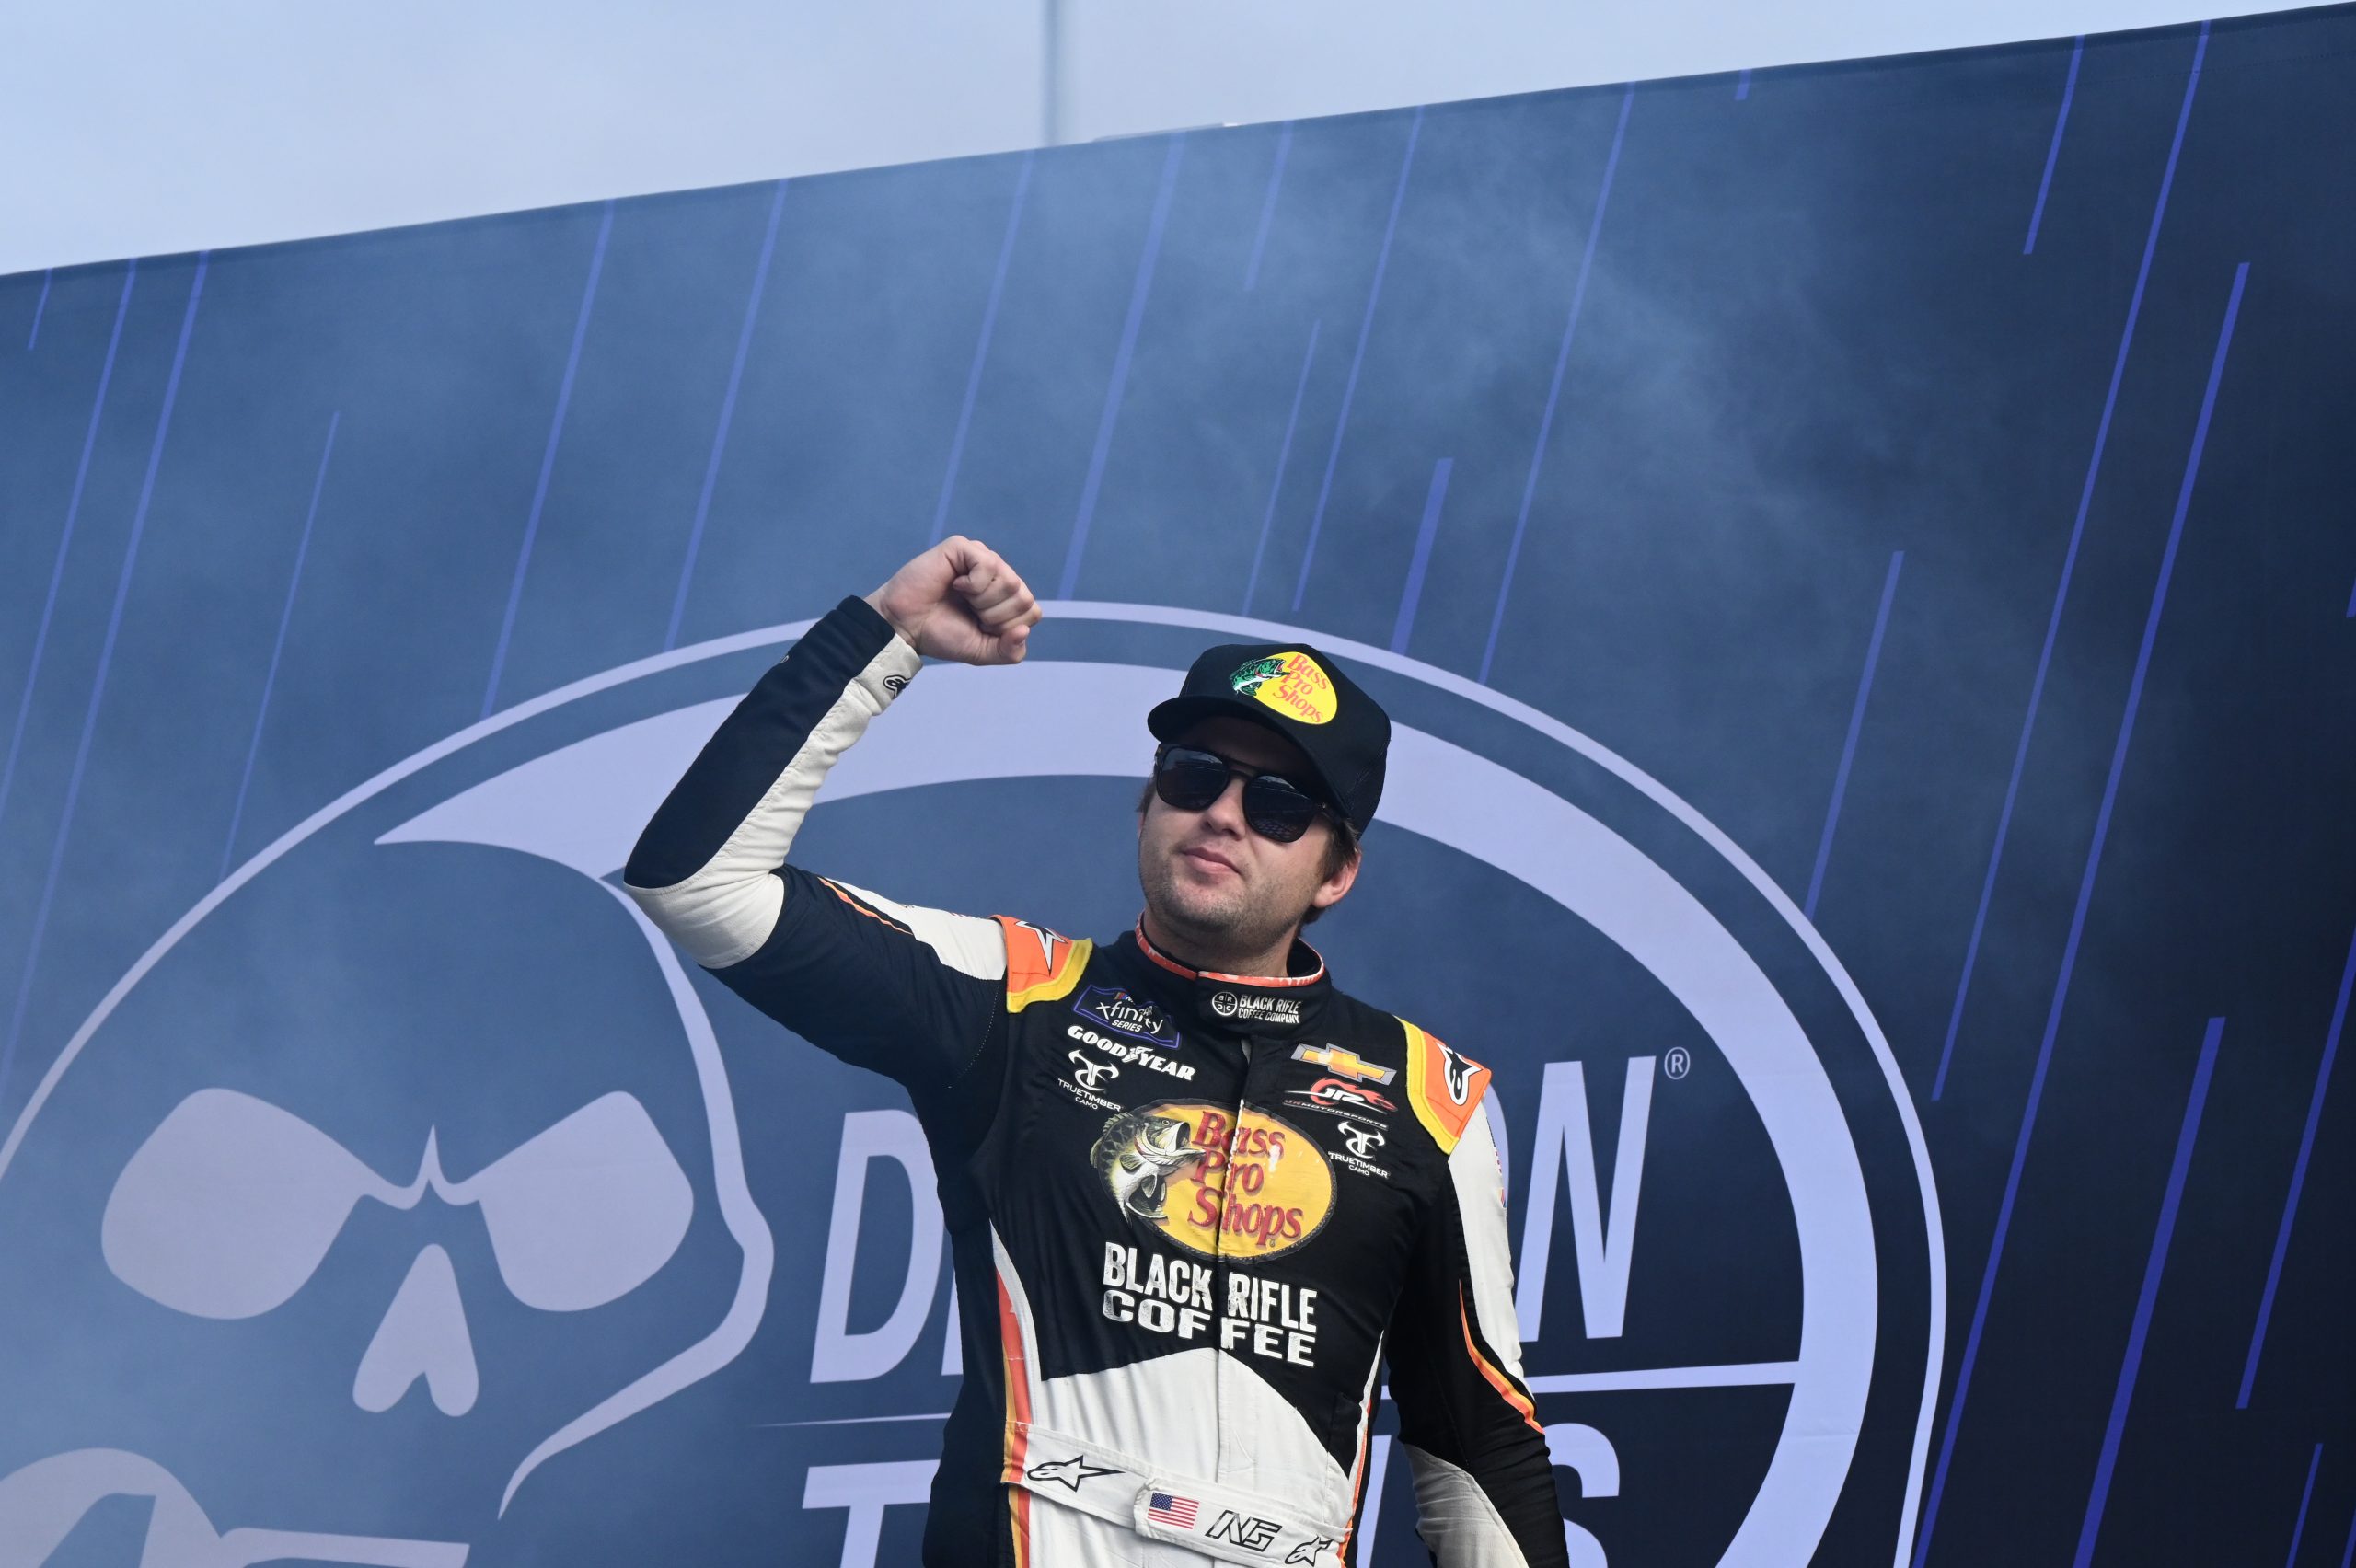 Noah Gragson hopes to close out his JR Motorsports tenure as a champion. (Photo: Kevin Ritchie | The Podium Finish)